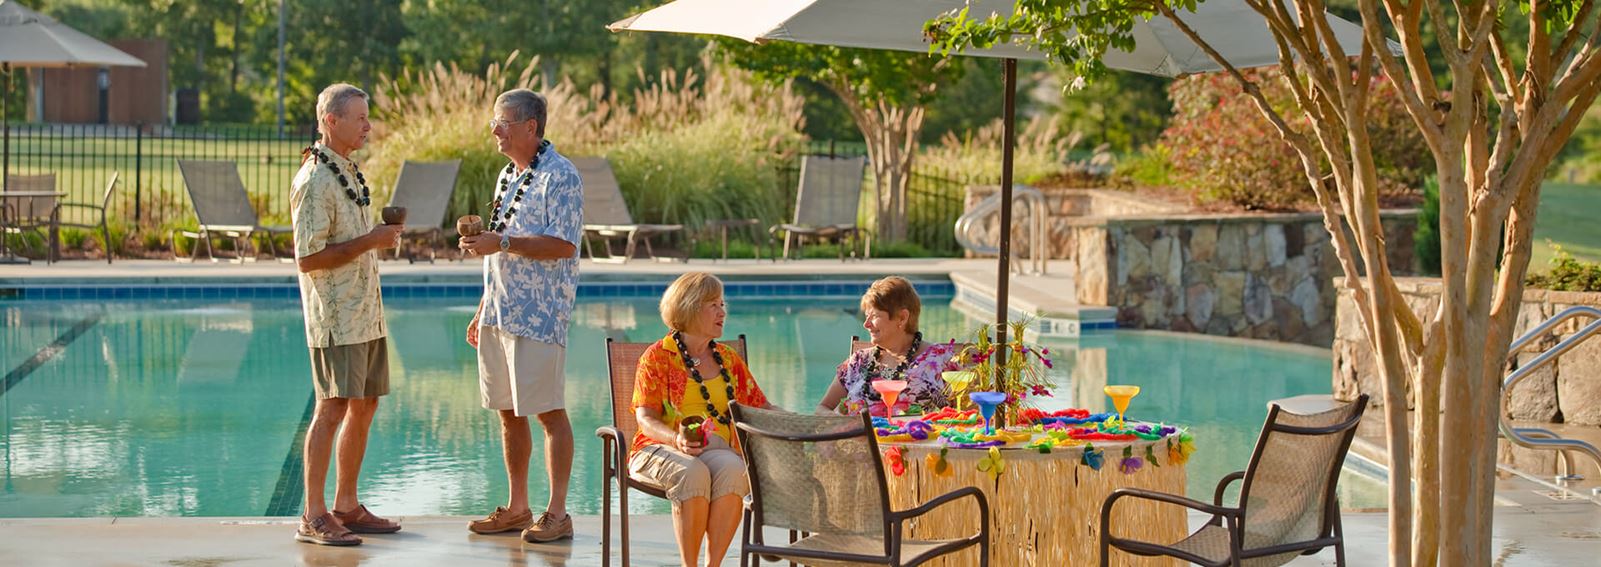 Couples enjoying luau event poolside in Sterling on the Lake.